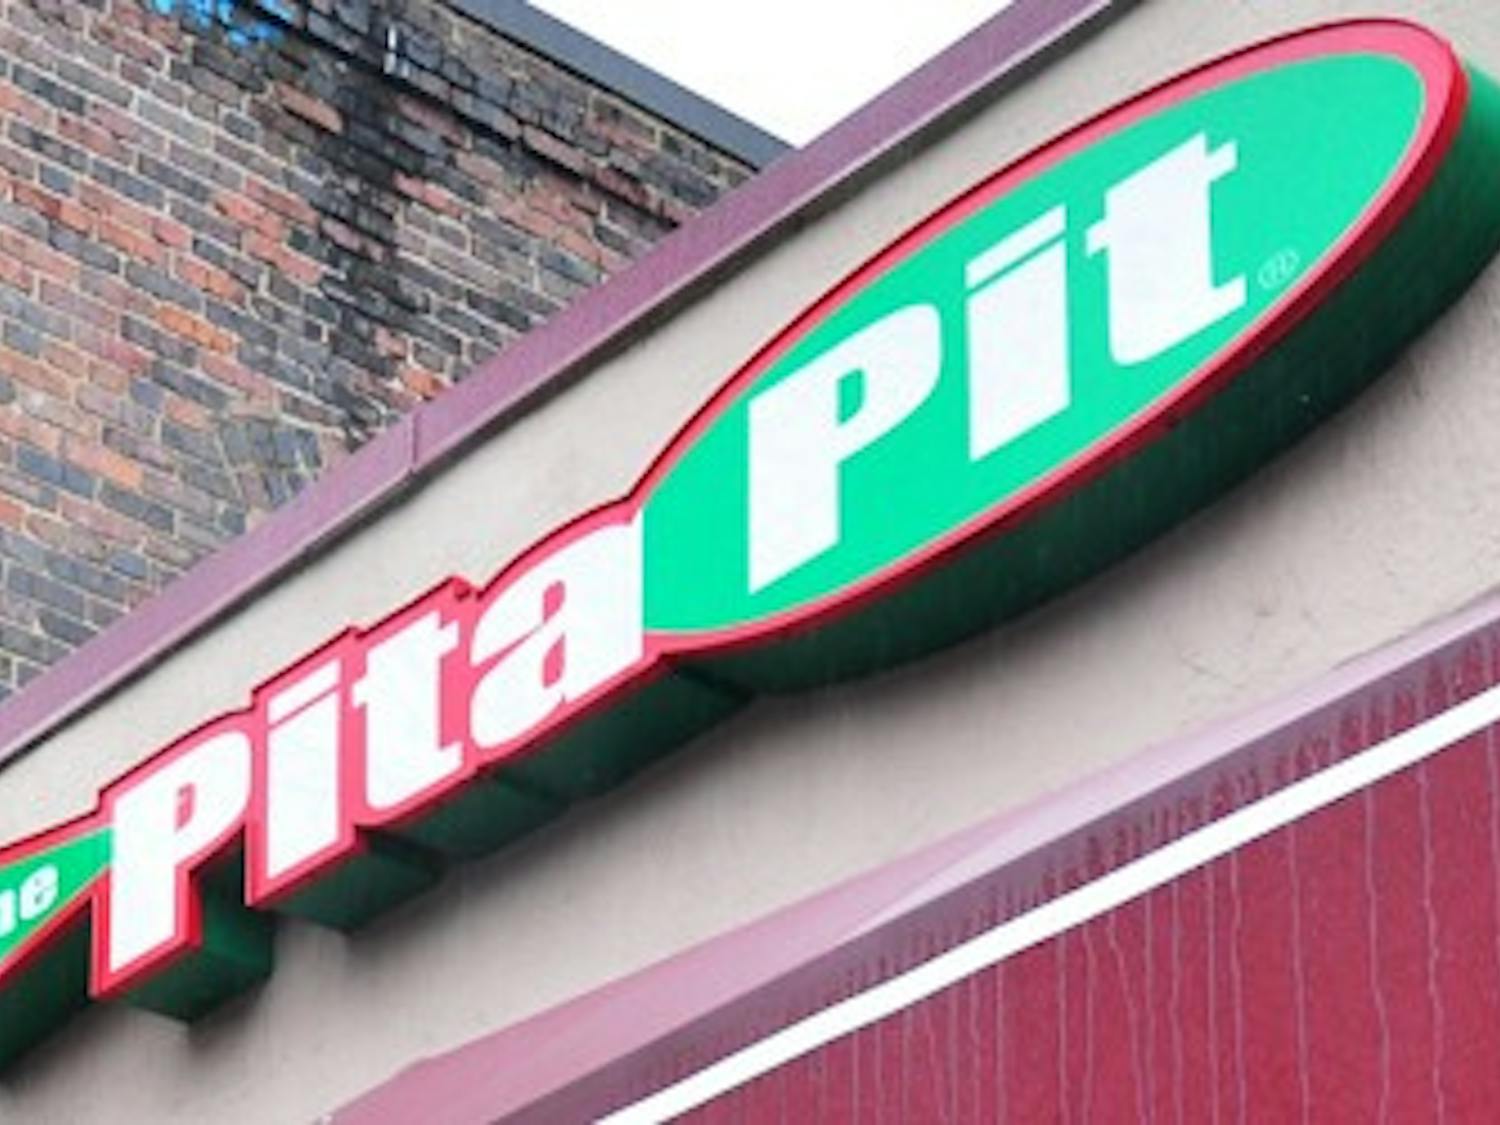 Carolina Brewery has doubled the number of beers they have. Top This is opening on Monday. Pita Pit is celebrating 10 years on Franklin Street.